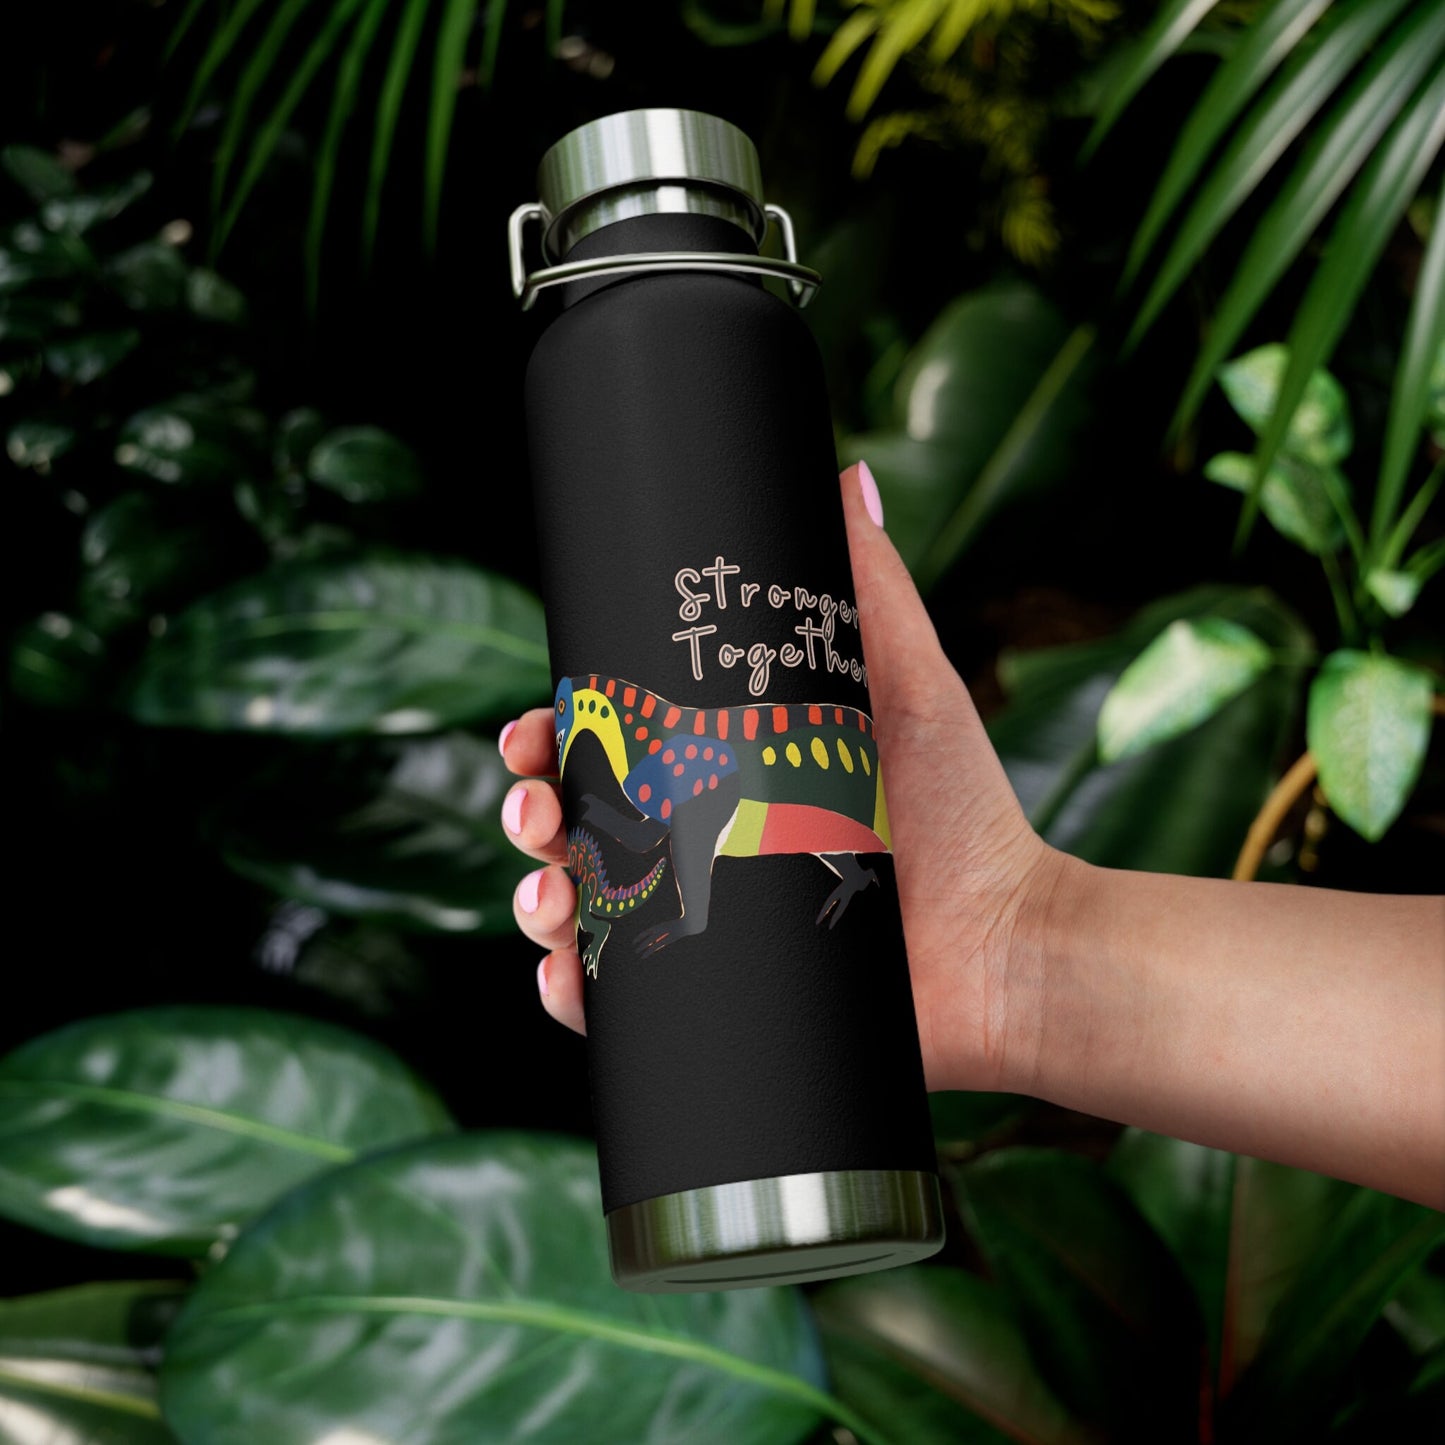 All Colors: Dino Stylish Copper Vacuum Insulated Bottle • 22oz • Stronger Together • Dino Water Bottle • Bottle For Student • Gift For Kids